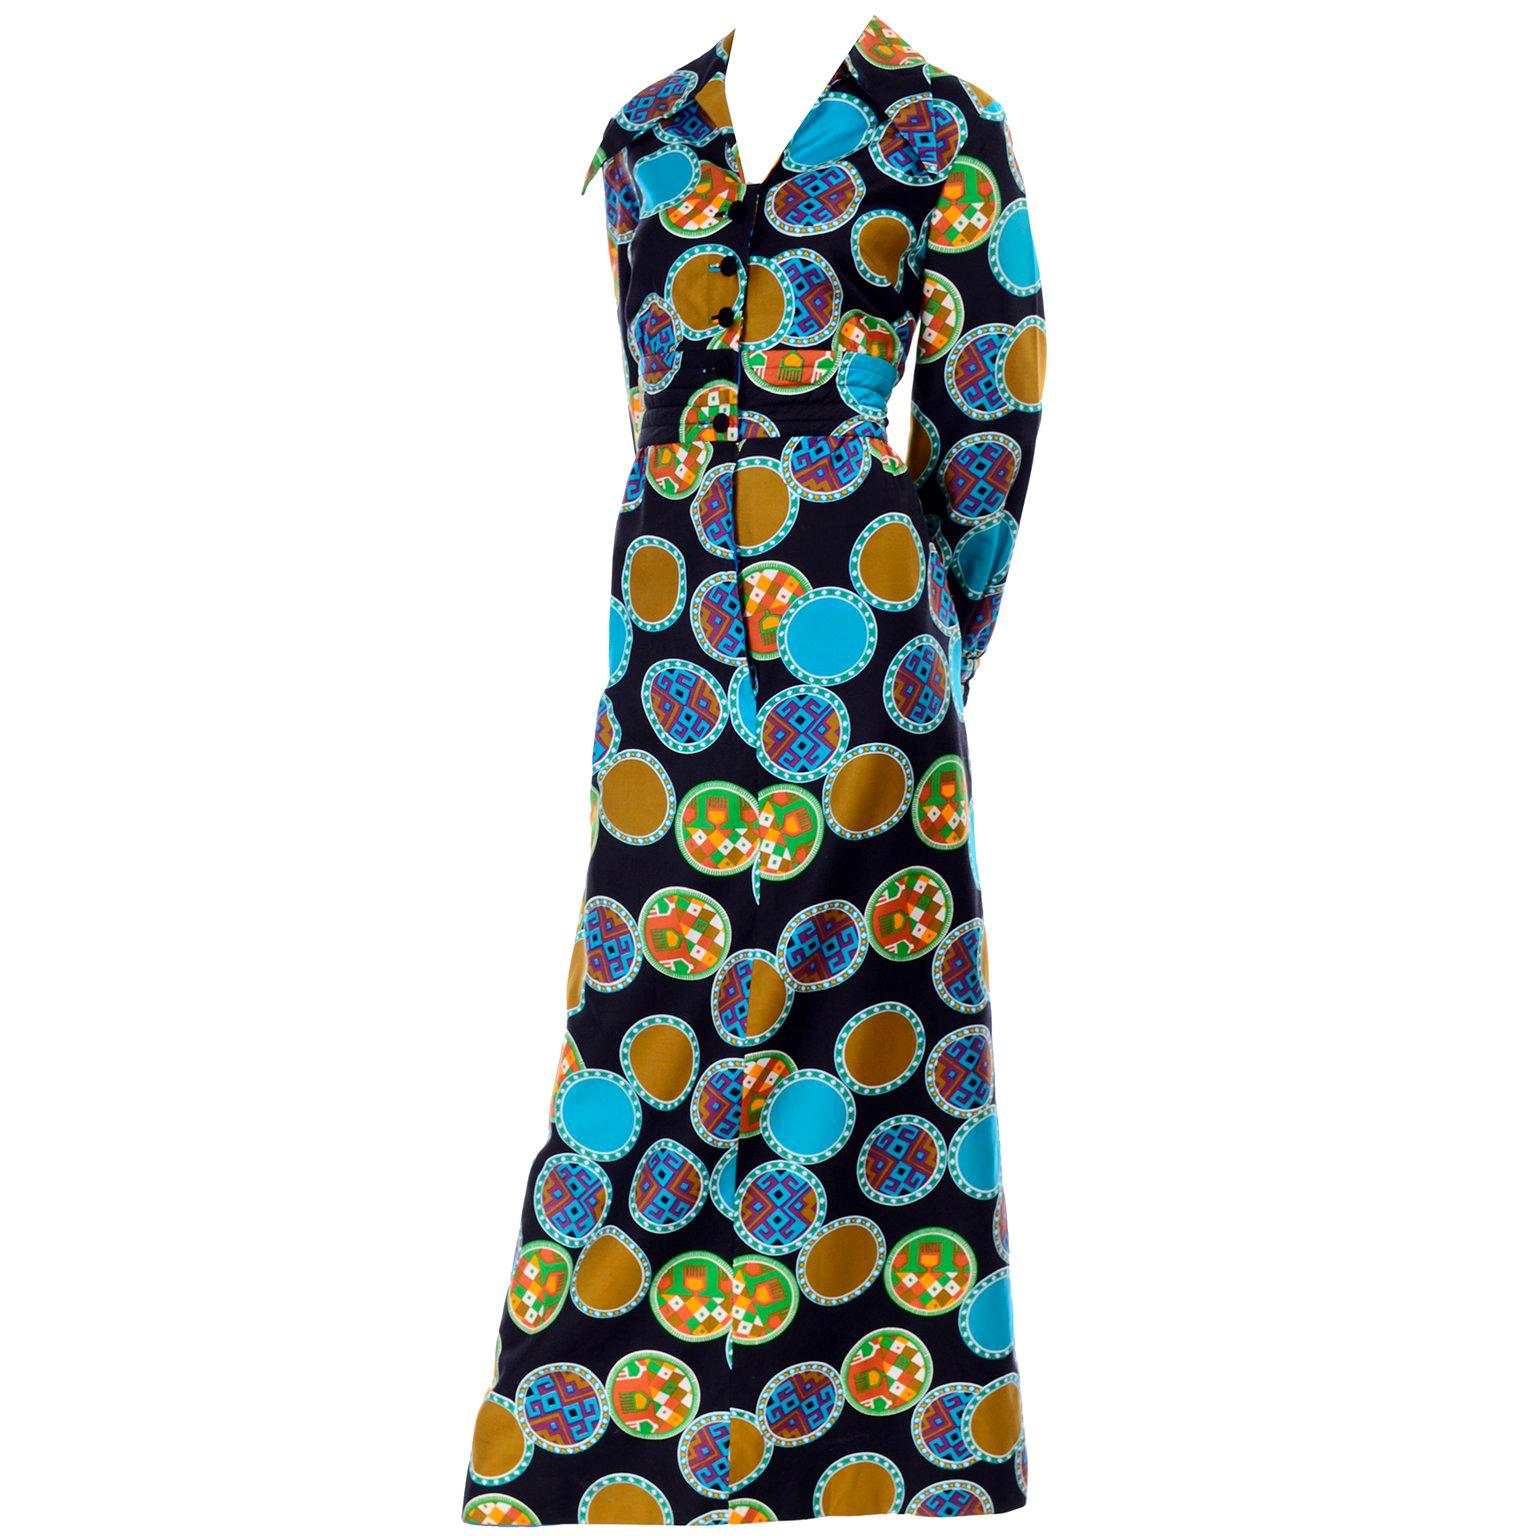 Dynasty Vintage Maxi Dress in Colorful Medallion Print With Pockets